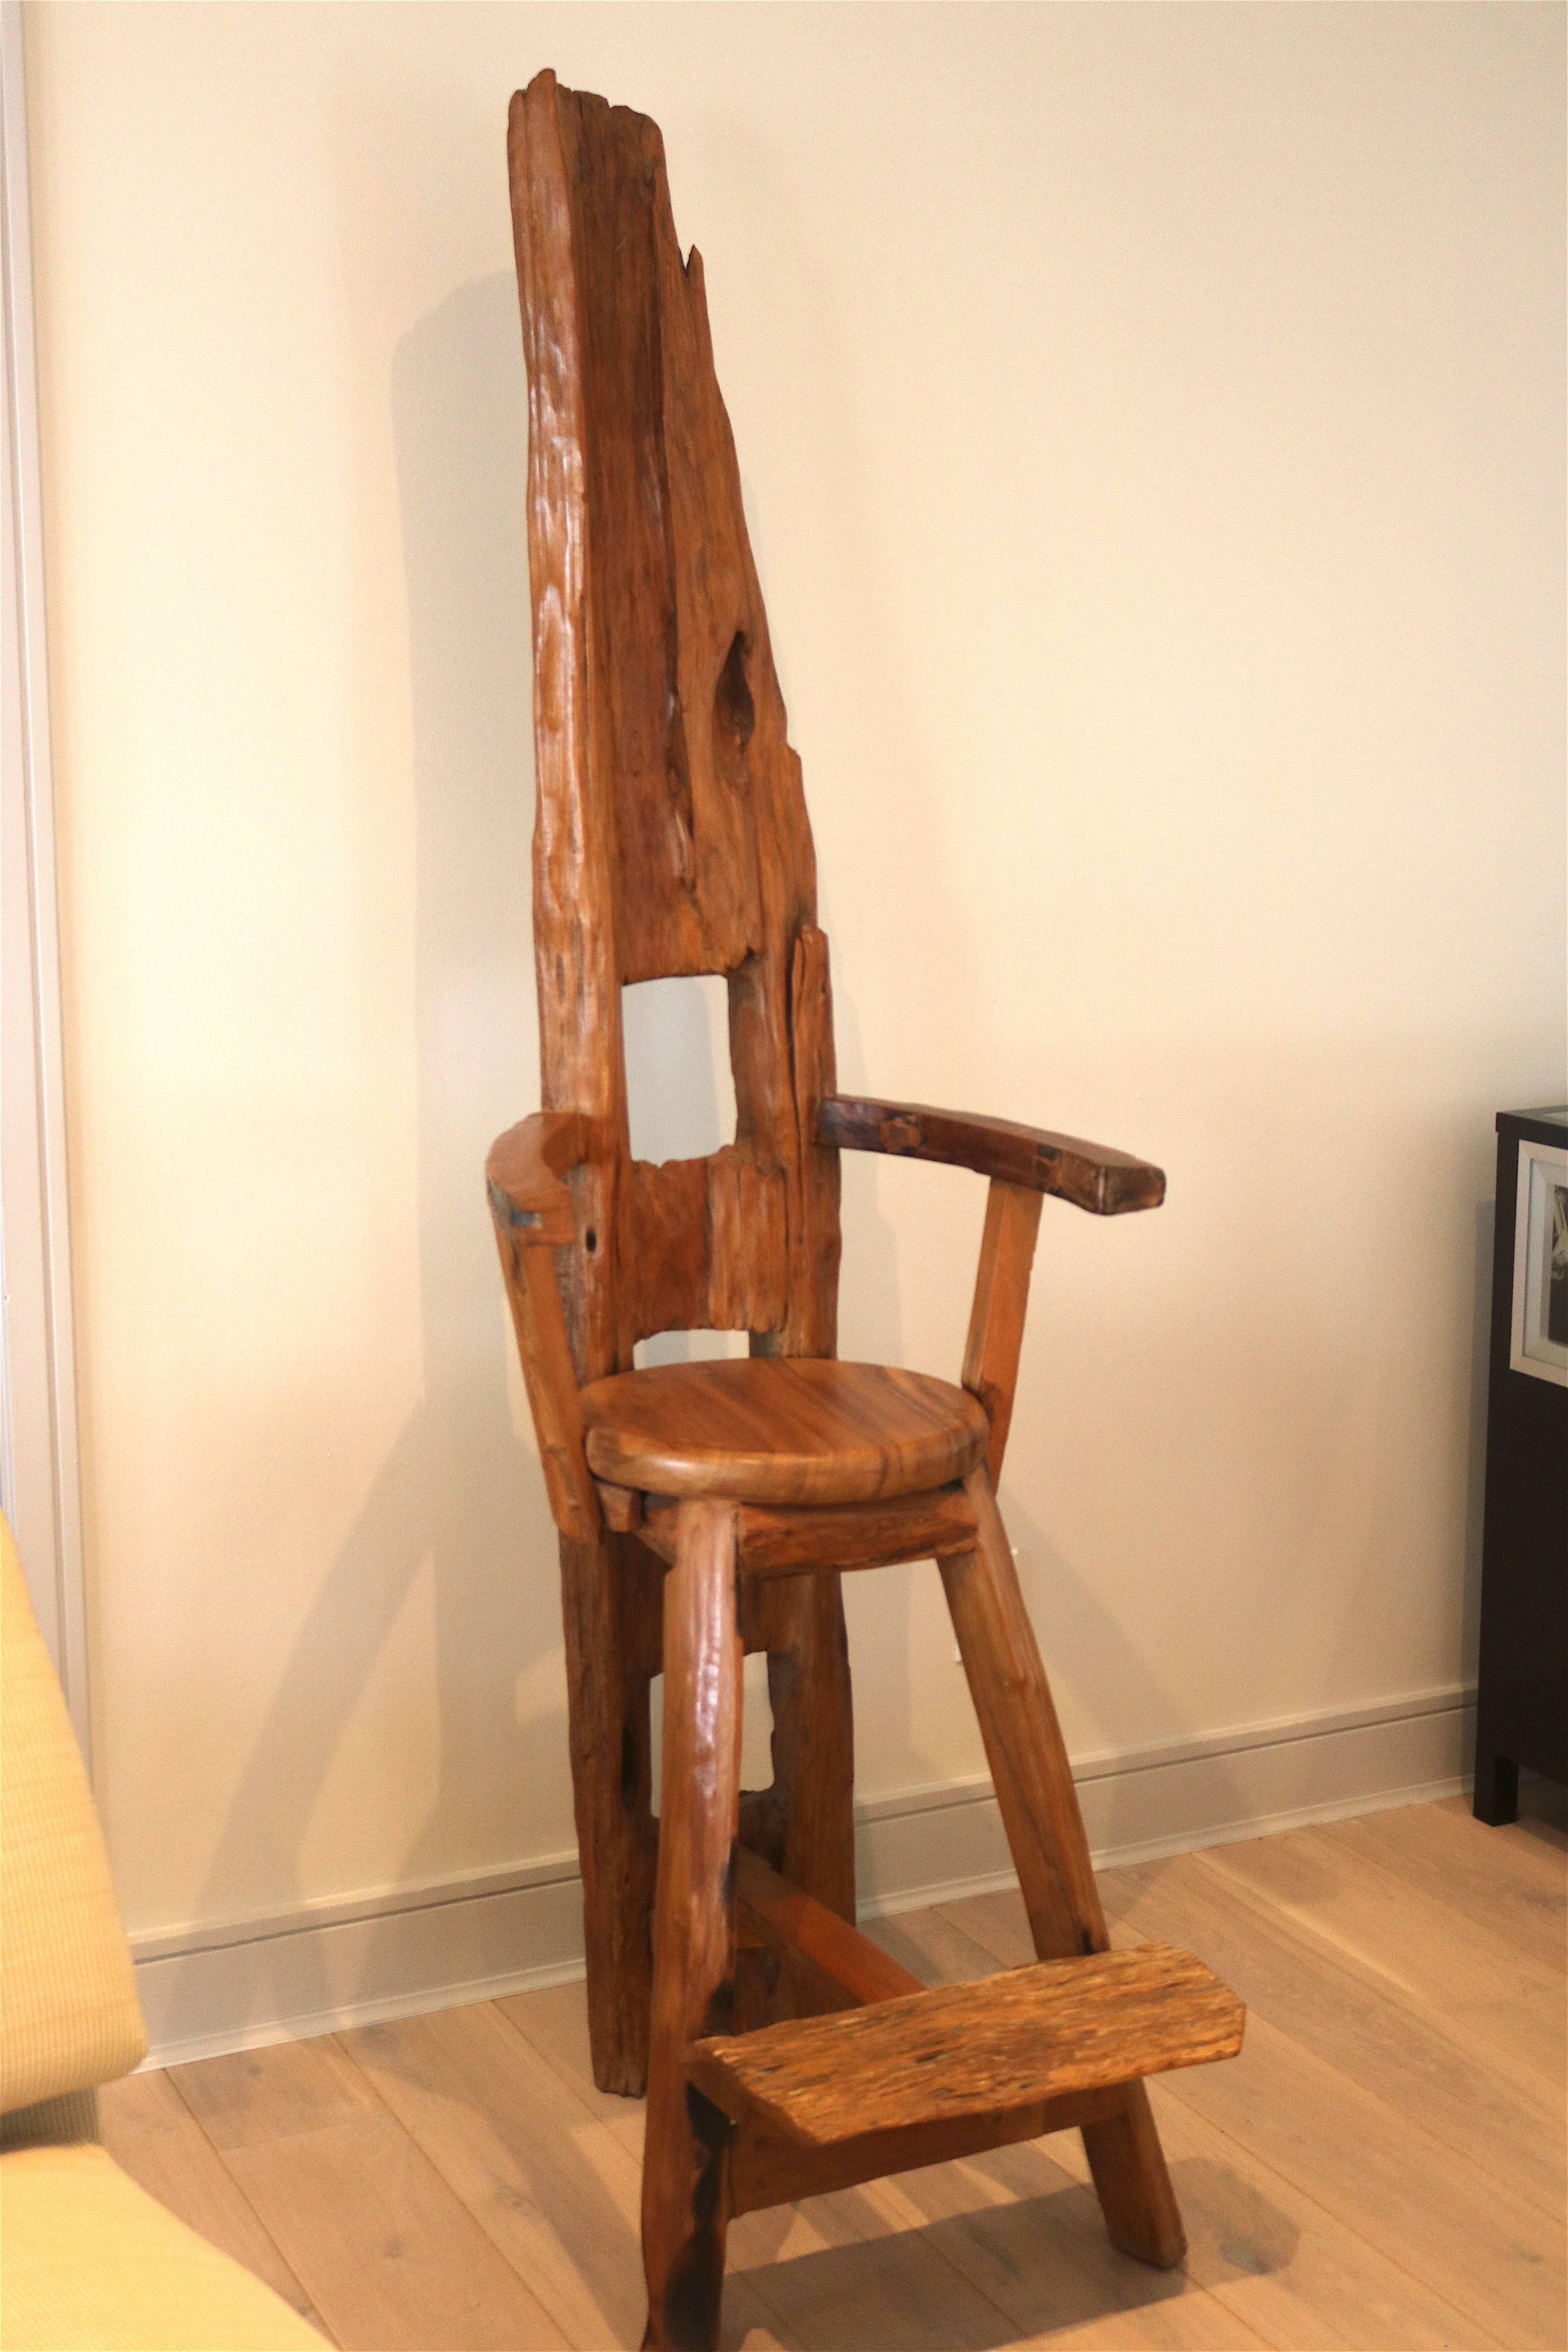 Inspired sculptural statement at 77 inches Tall!
Mesmerizing one-of-a-kind handcrafted wood chair carved and constructed from a huge tree log by a Master Artisan for the 'WoW' factor in your space. Step up on the footrest to reach the 30 